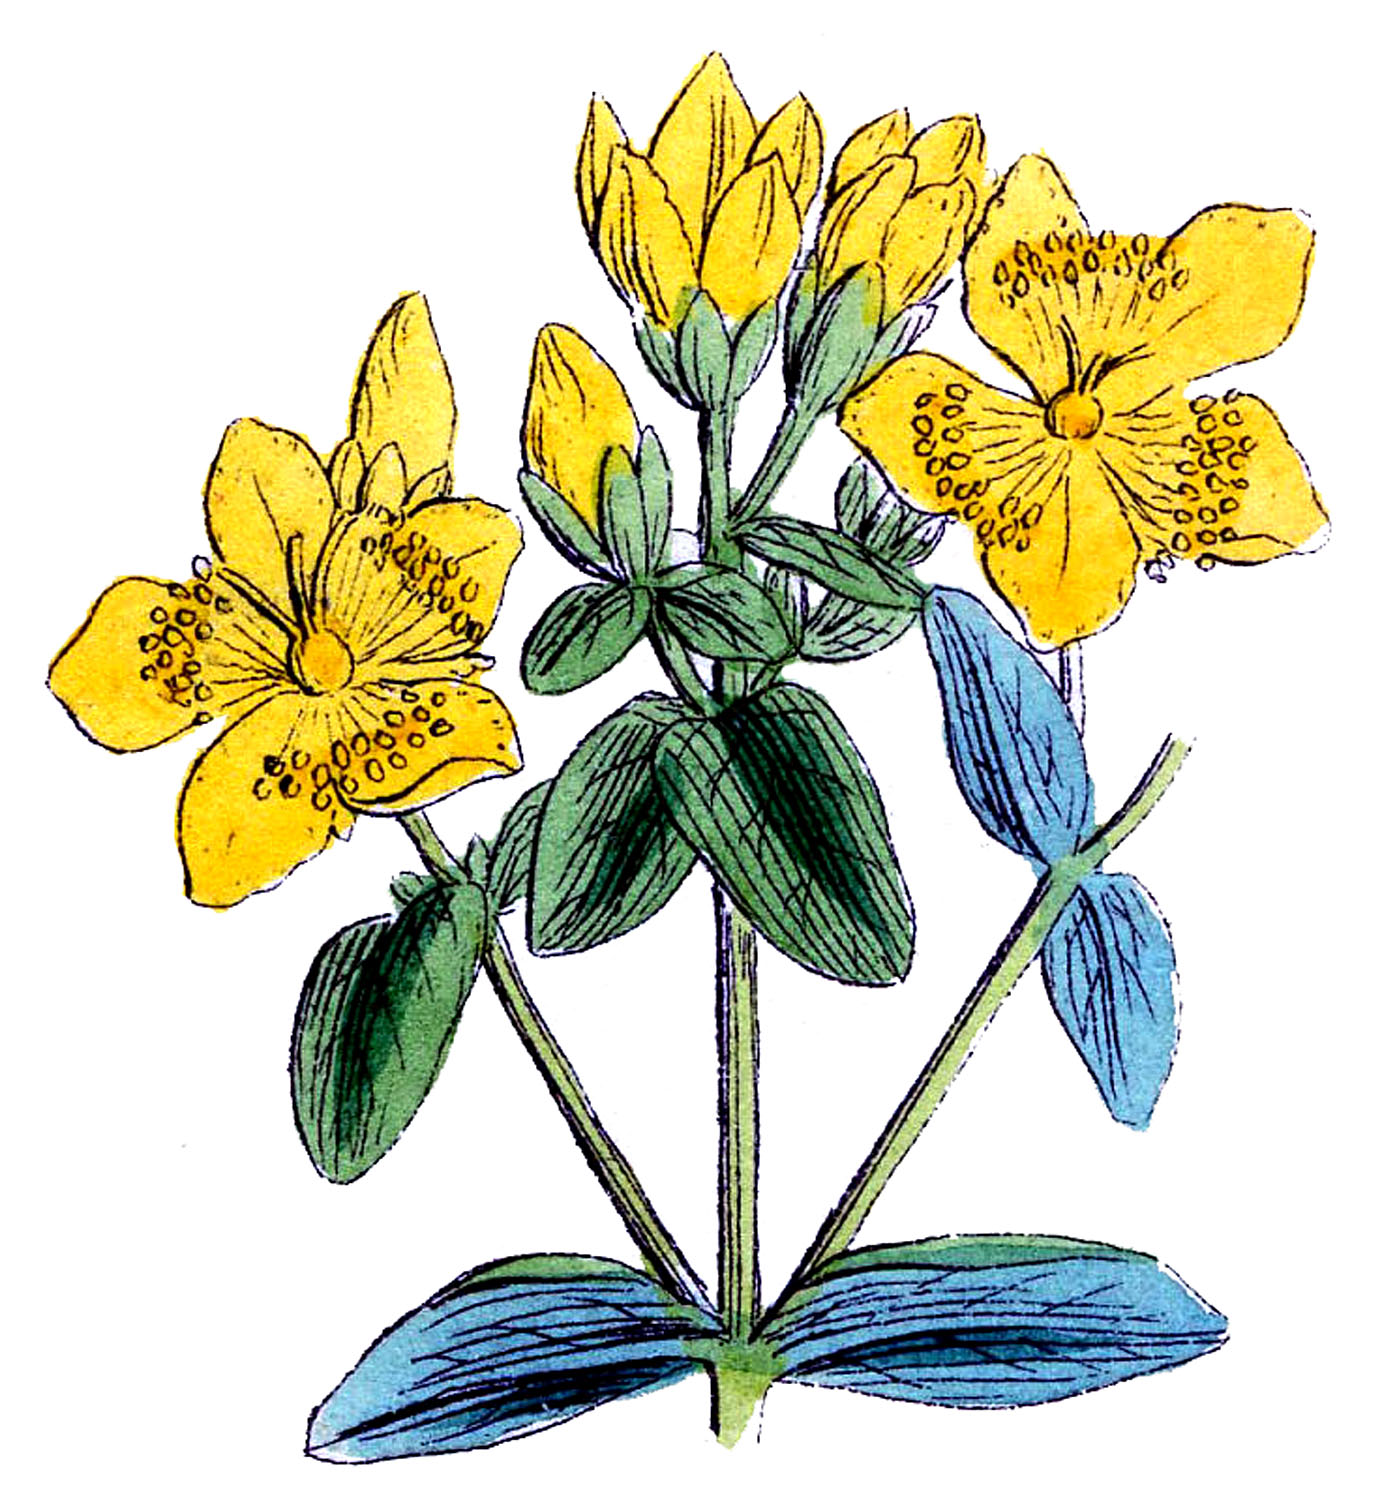 Vintage Botanical Images - Bright Yellow Flowers - The Graphics Fairy